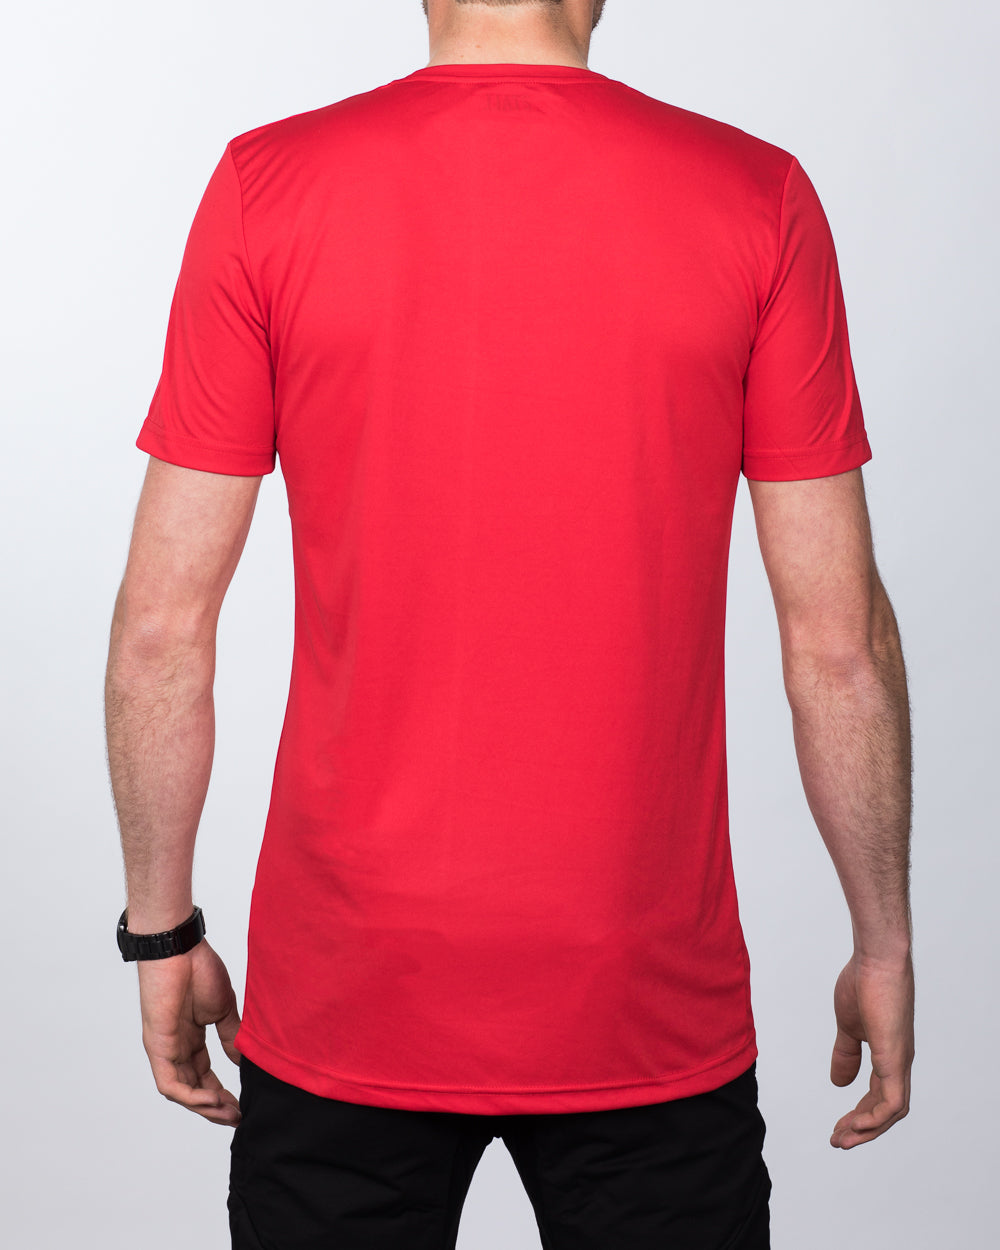 2t Dry Tech Training Top (red)